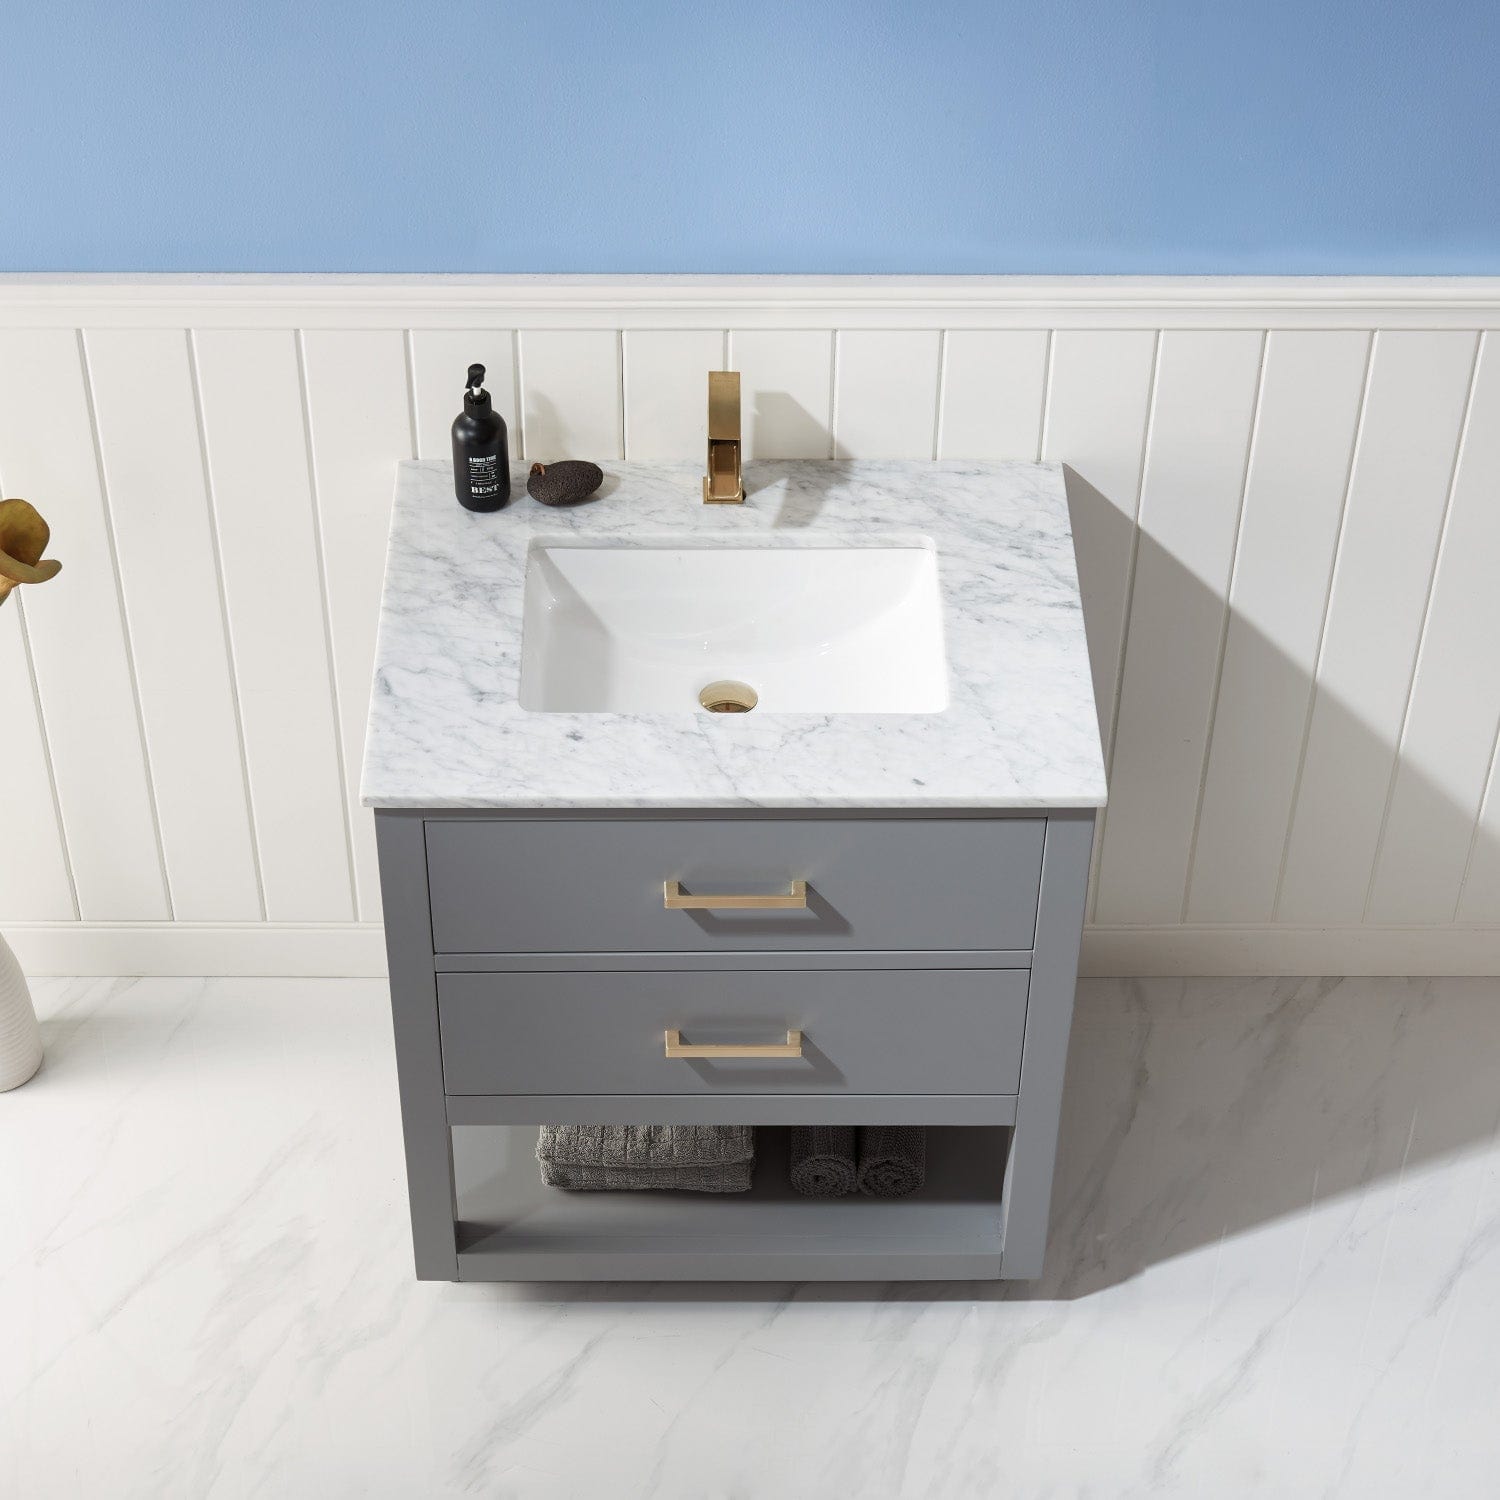 Altair Remi 30" Single Bathroom Vanity Set in Gray and Carrara White Marble Countertop without Mirror 532030-GR-CA-NM - Molaix631112971348Vanity532030-GR-CA-NM